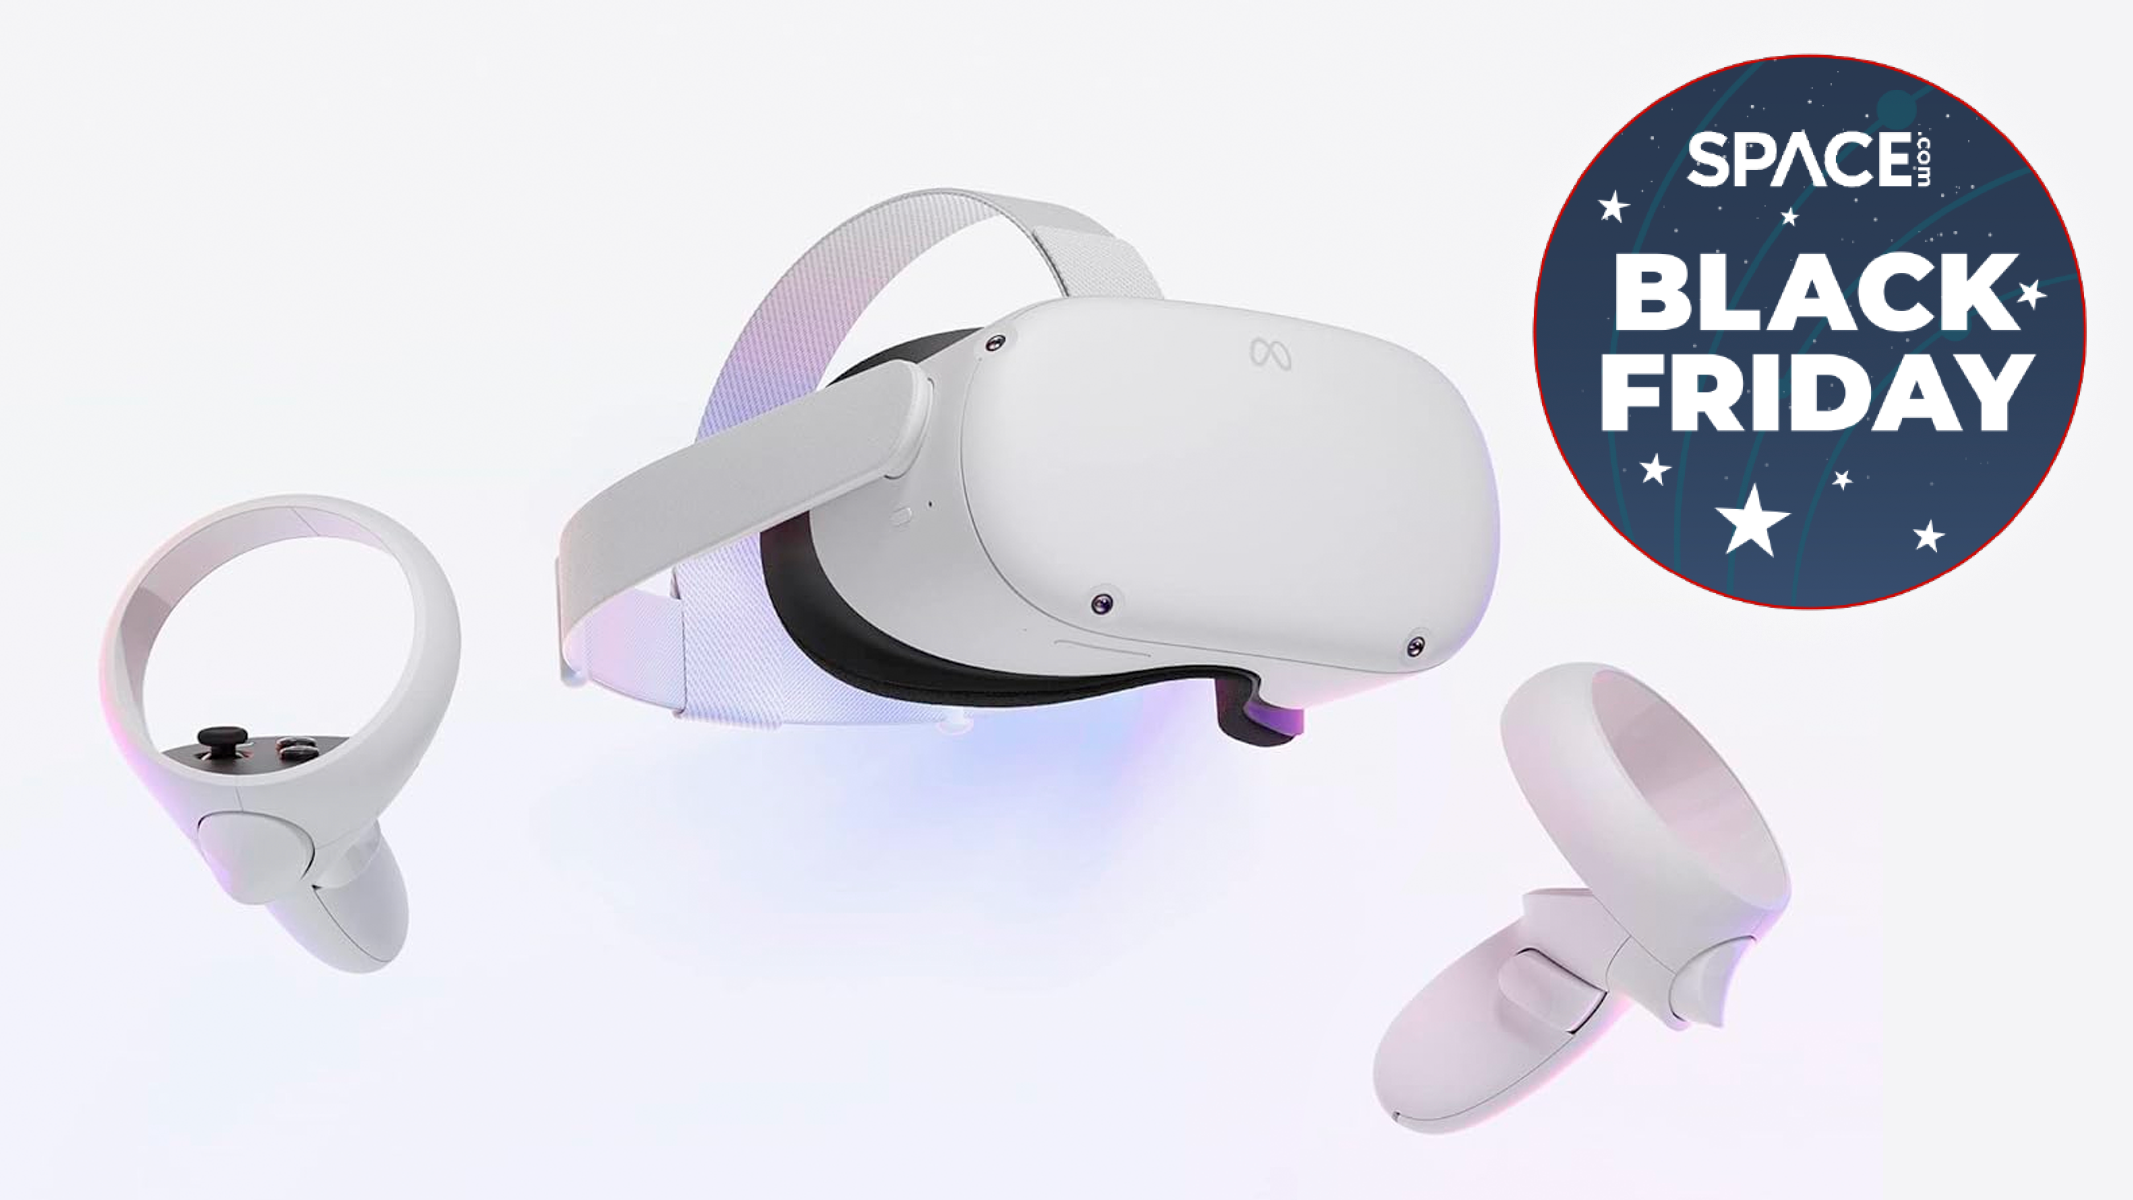 Black Friday VR deal: get $50 off the Meta Quest 2 headset Space